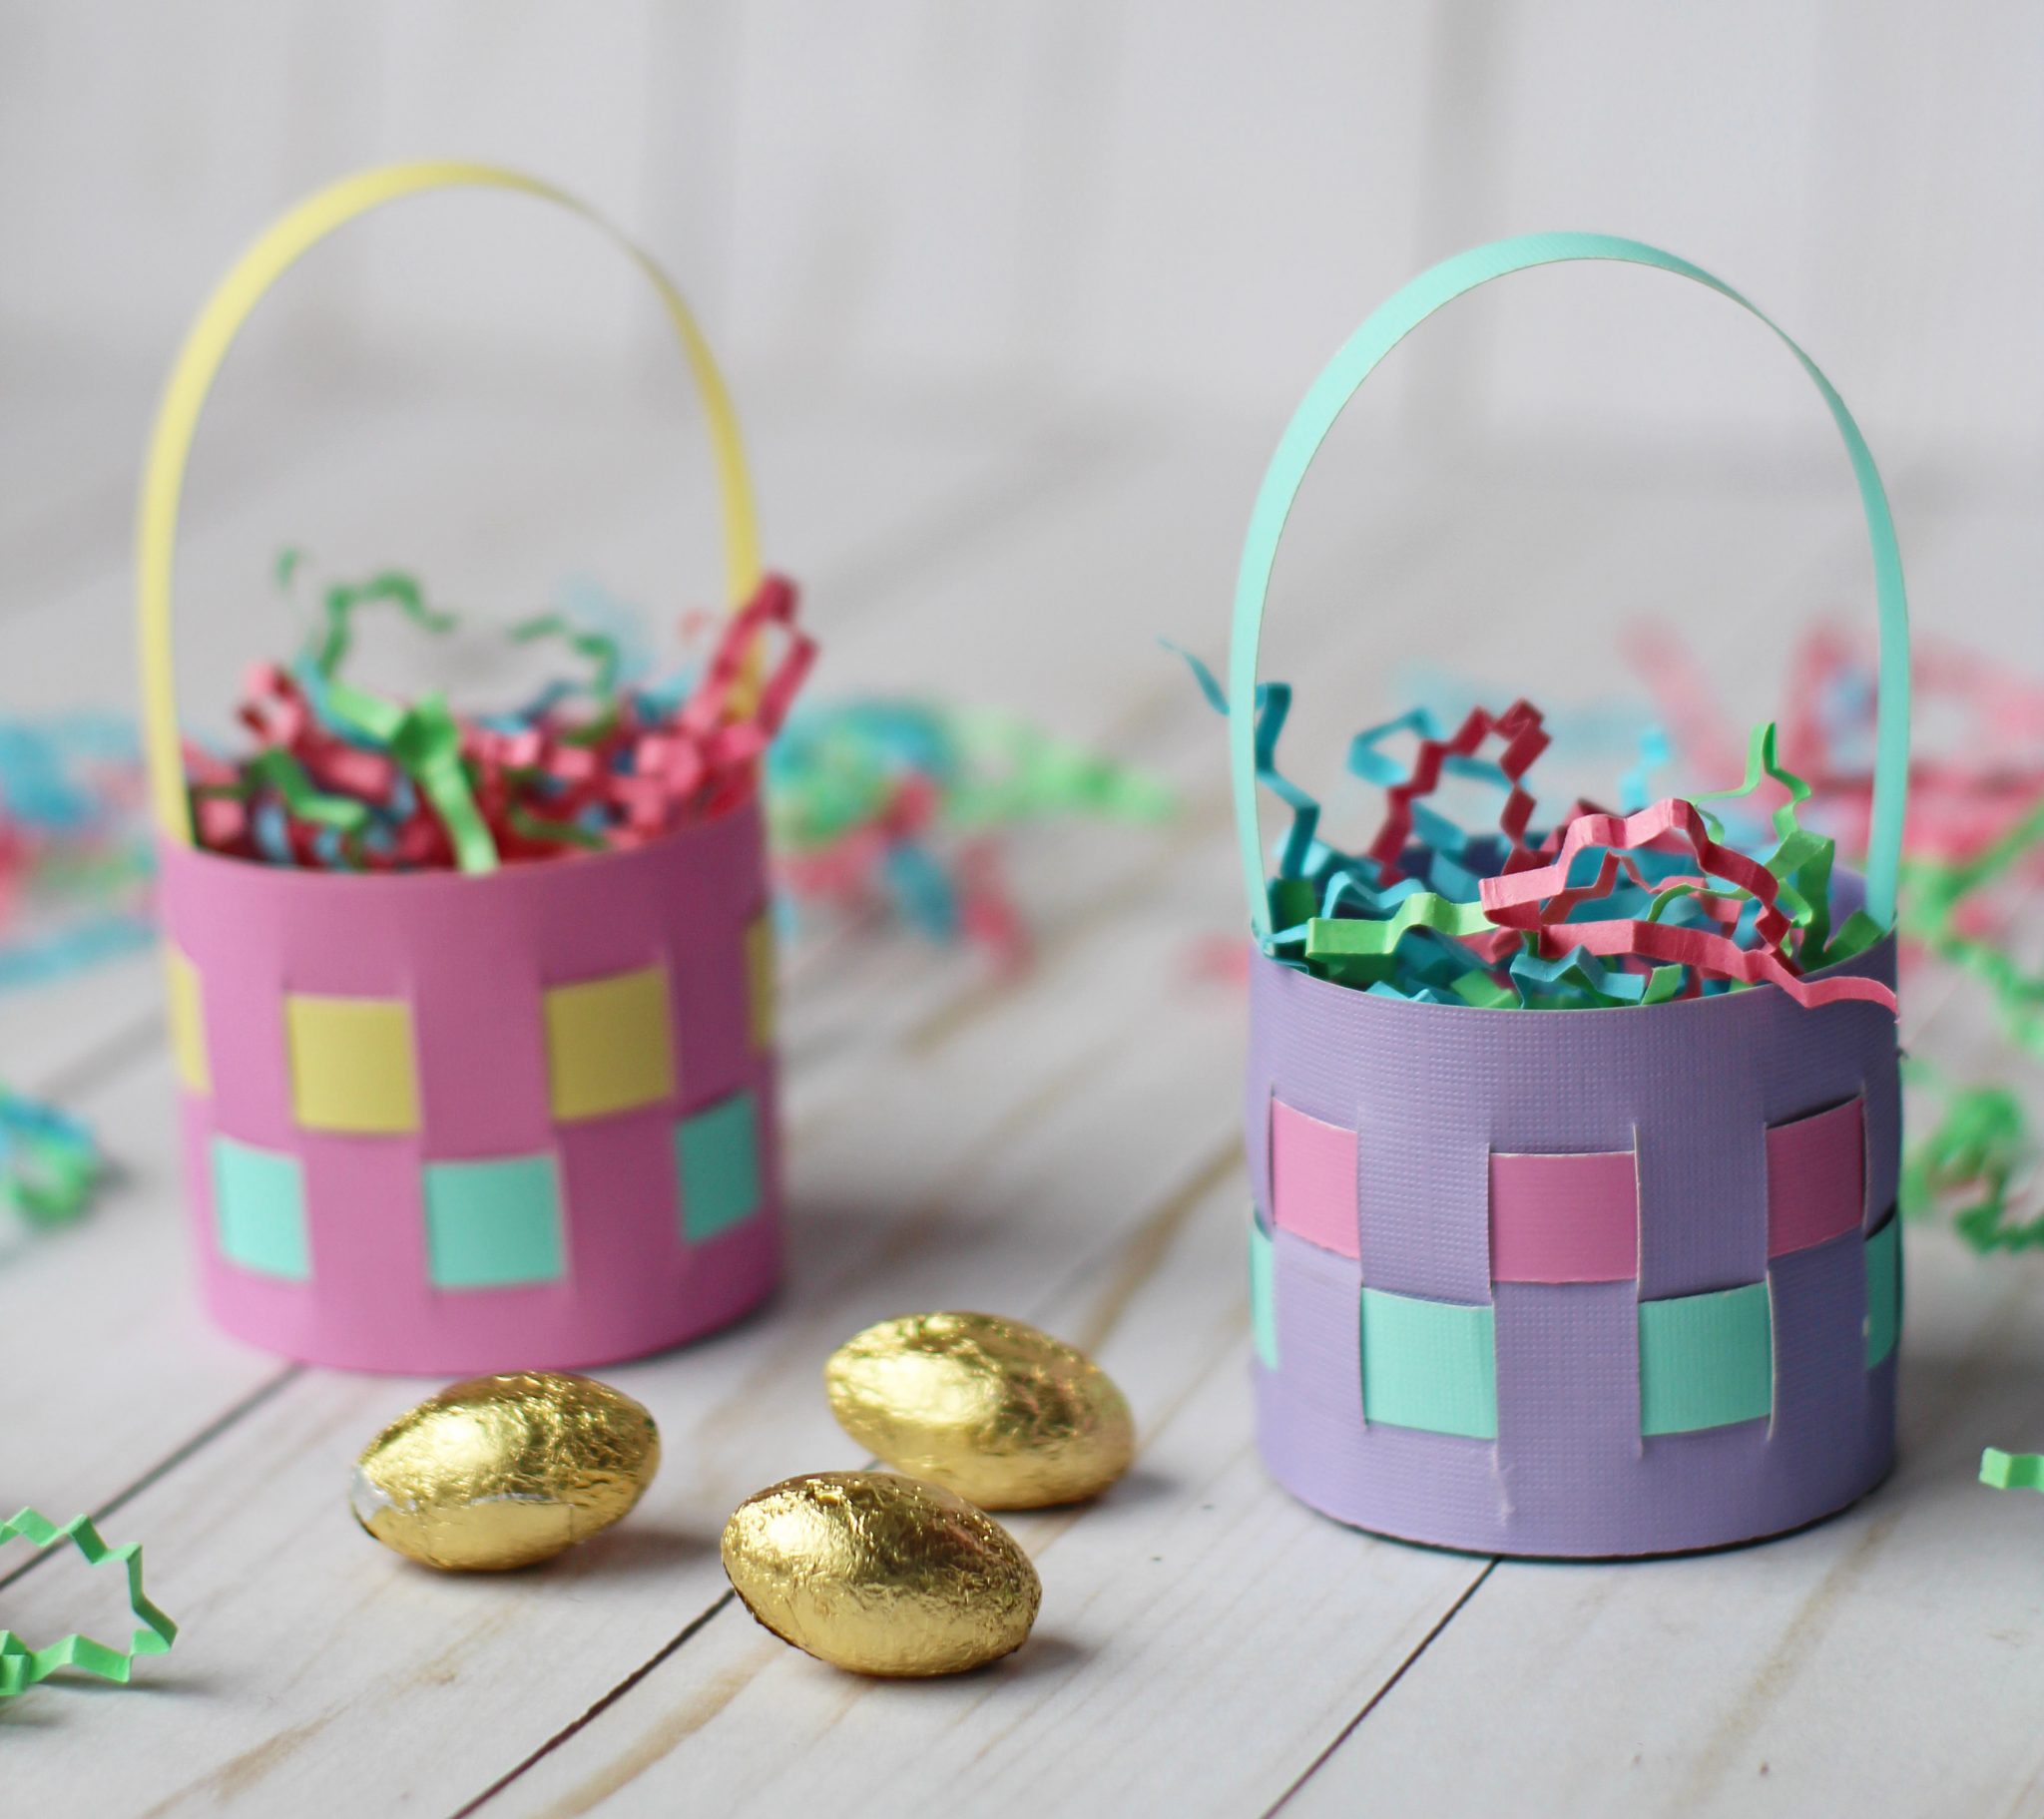 How Do You Make Easter Baskets Out Of Paper?